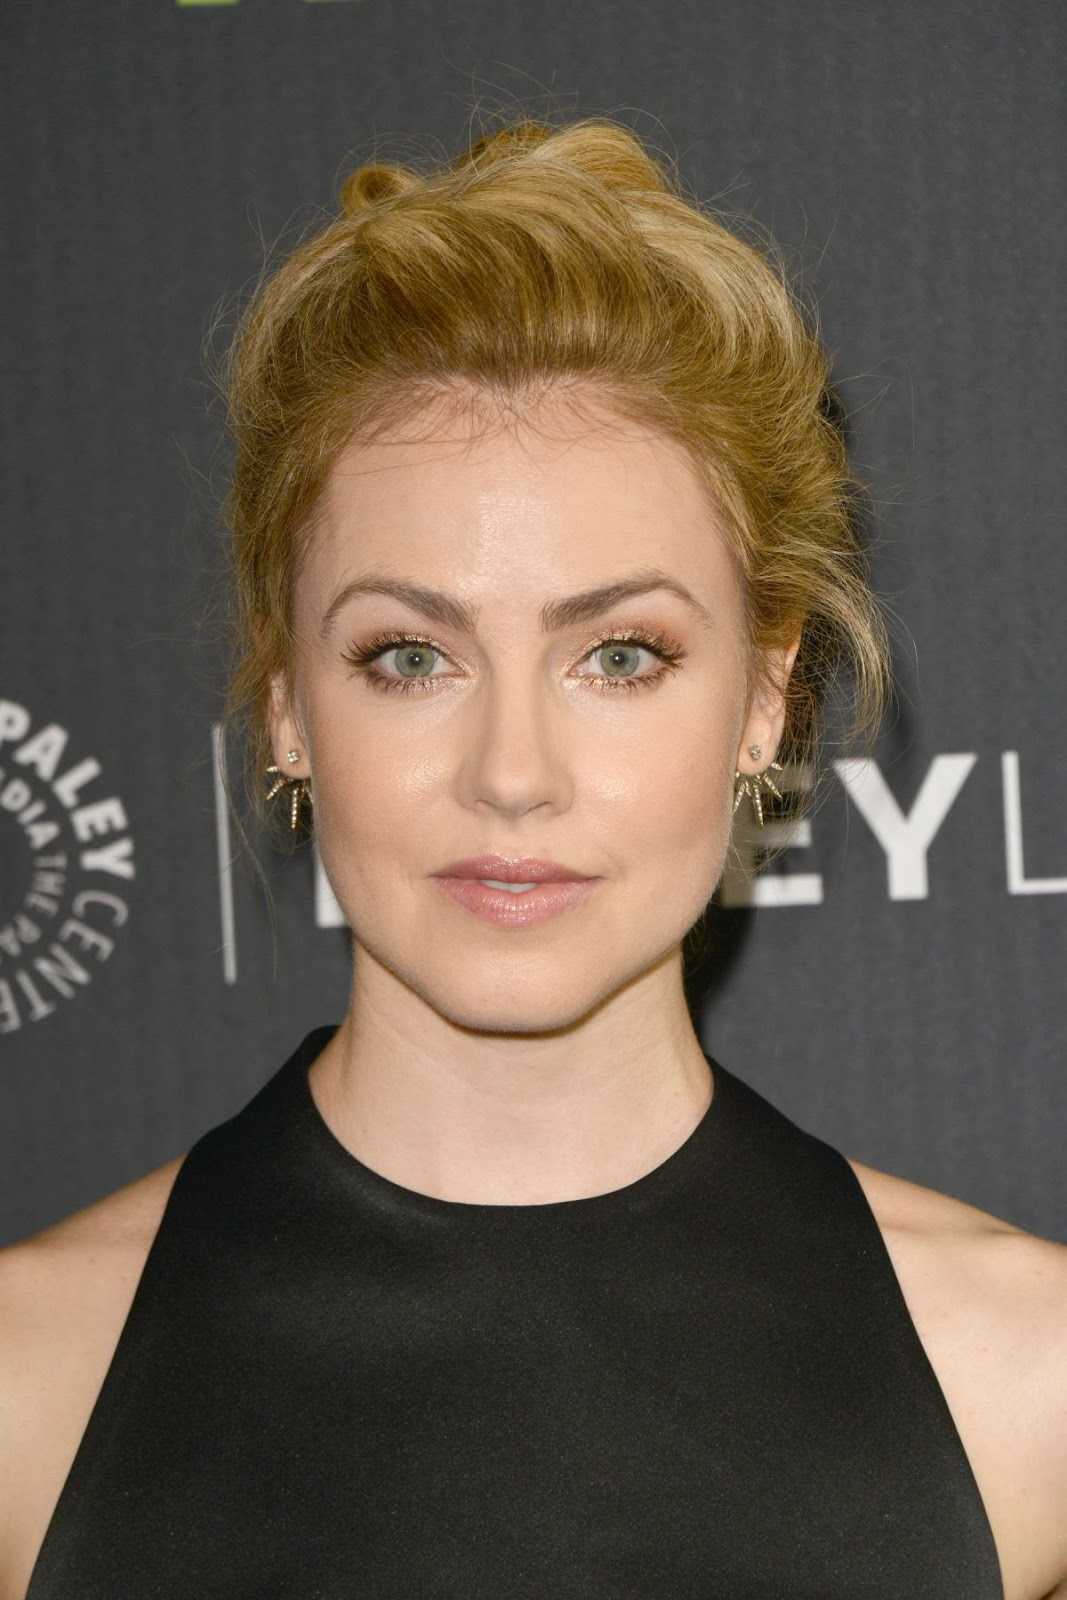 65+ Hot Pictures Of Amanda Schull That Are Sure To Keep You On The Edge Of Your Seat | Best Of Comic Books